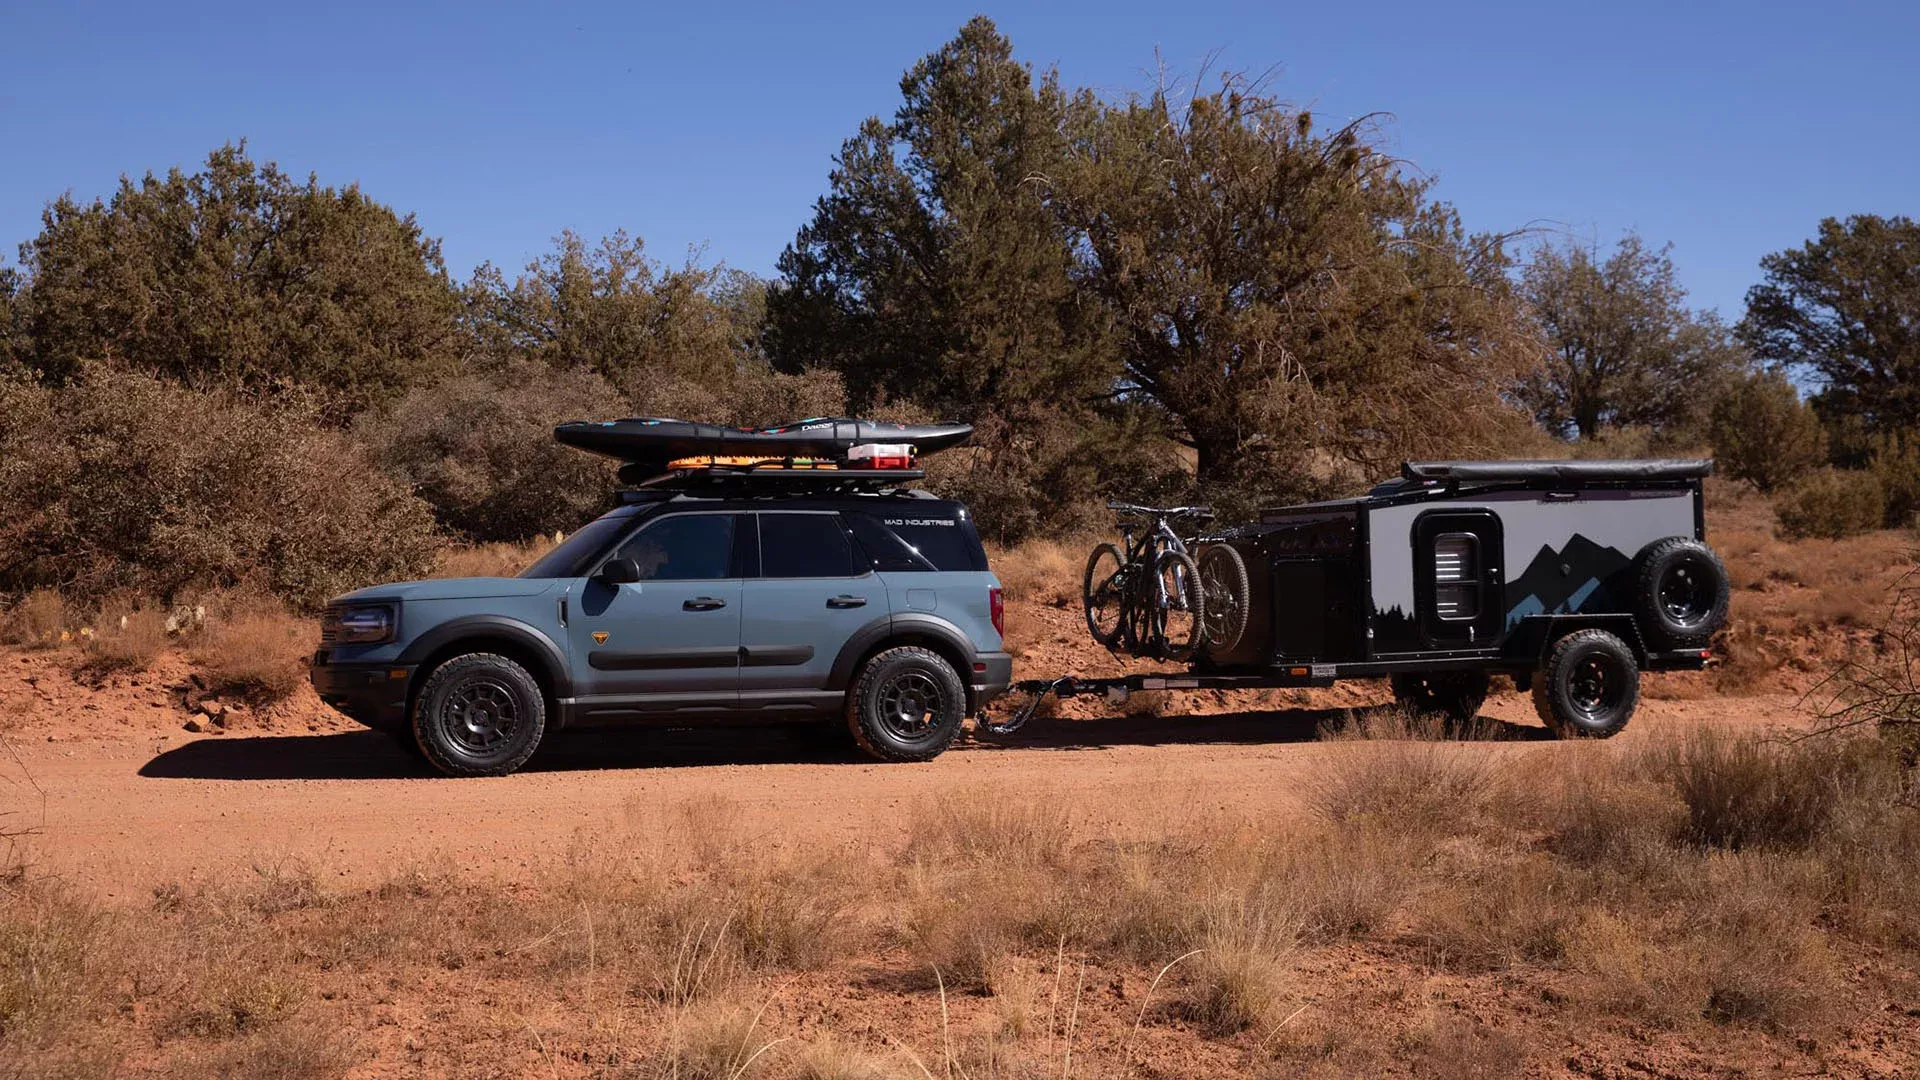 Ford needed an offroad camper trailer as tough as the new Bronco 